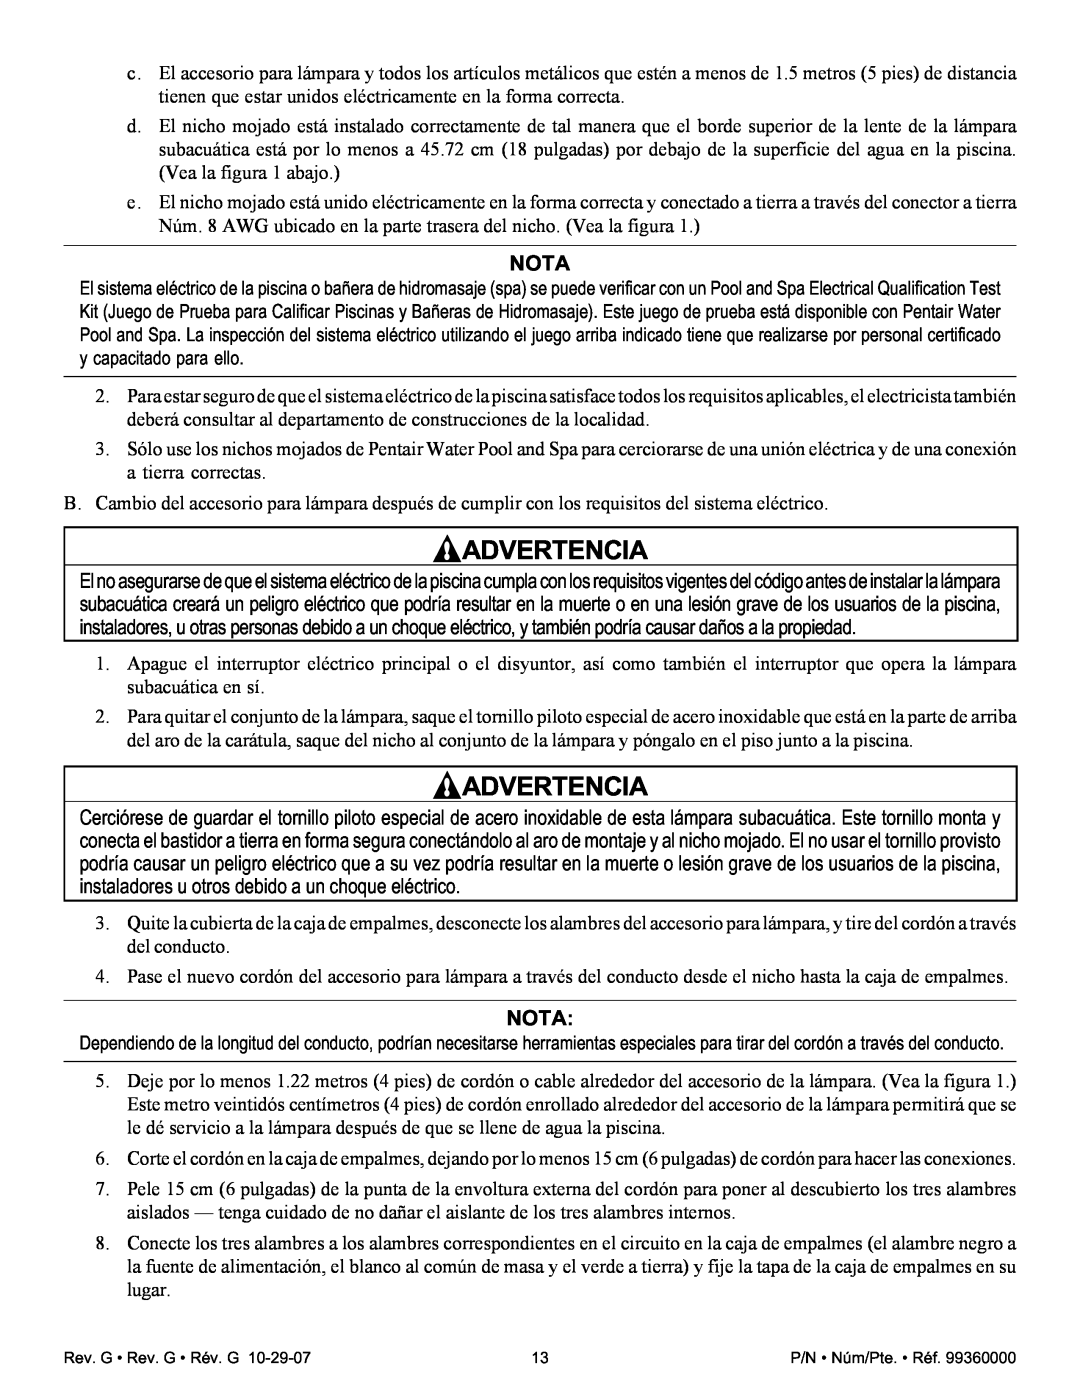 Pentair Amerlite important safety instructions Nota, Advertencia 